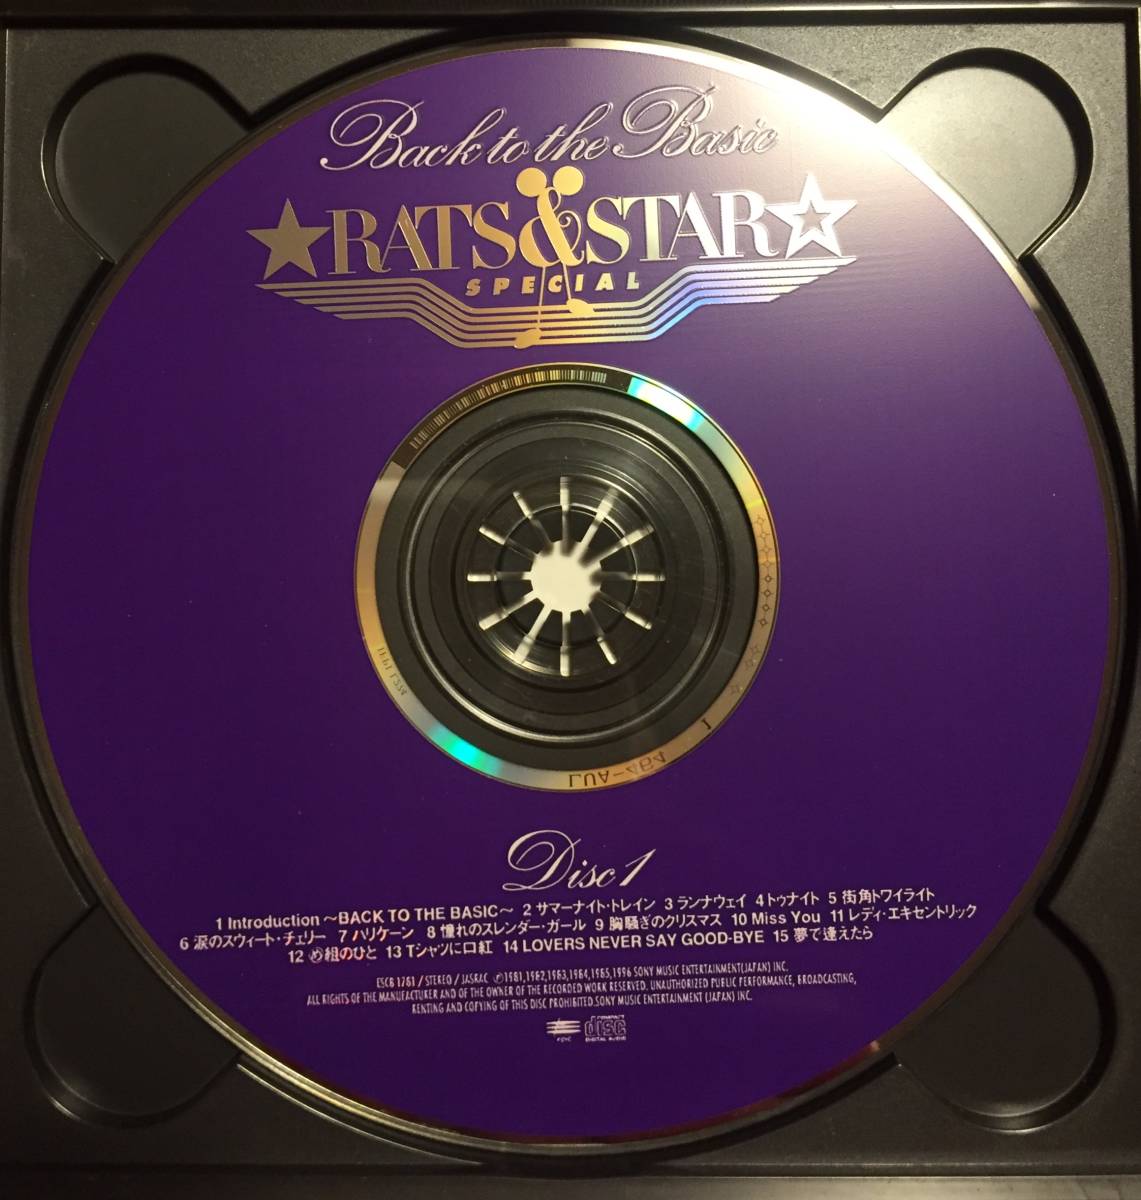 CD-RATS & STARラッツ & スター・2枚組 1996年「BACK TO THE BASIC The Very Best of RATS&STAR」ESCB 1781-2・送料230円～_画像5